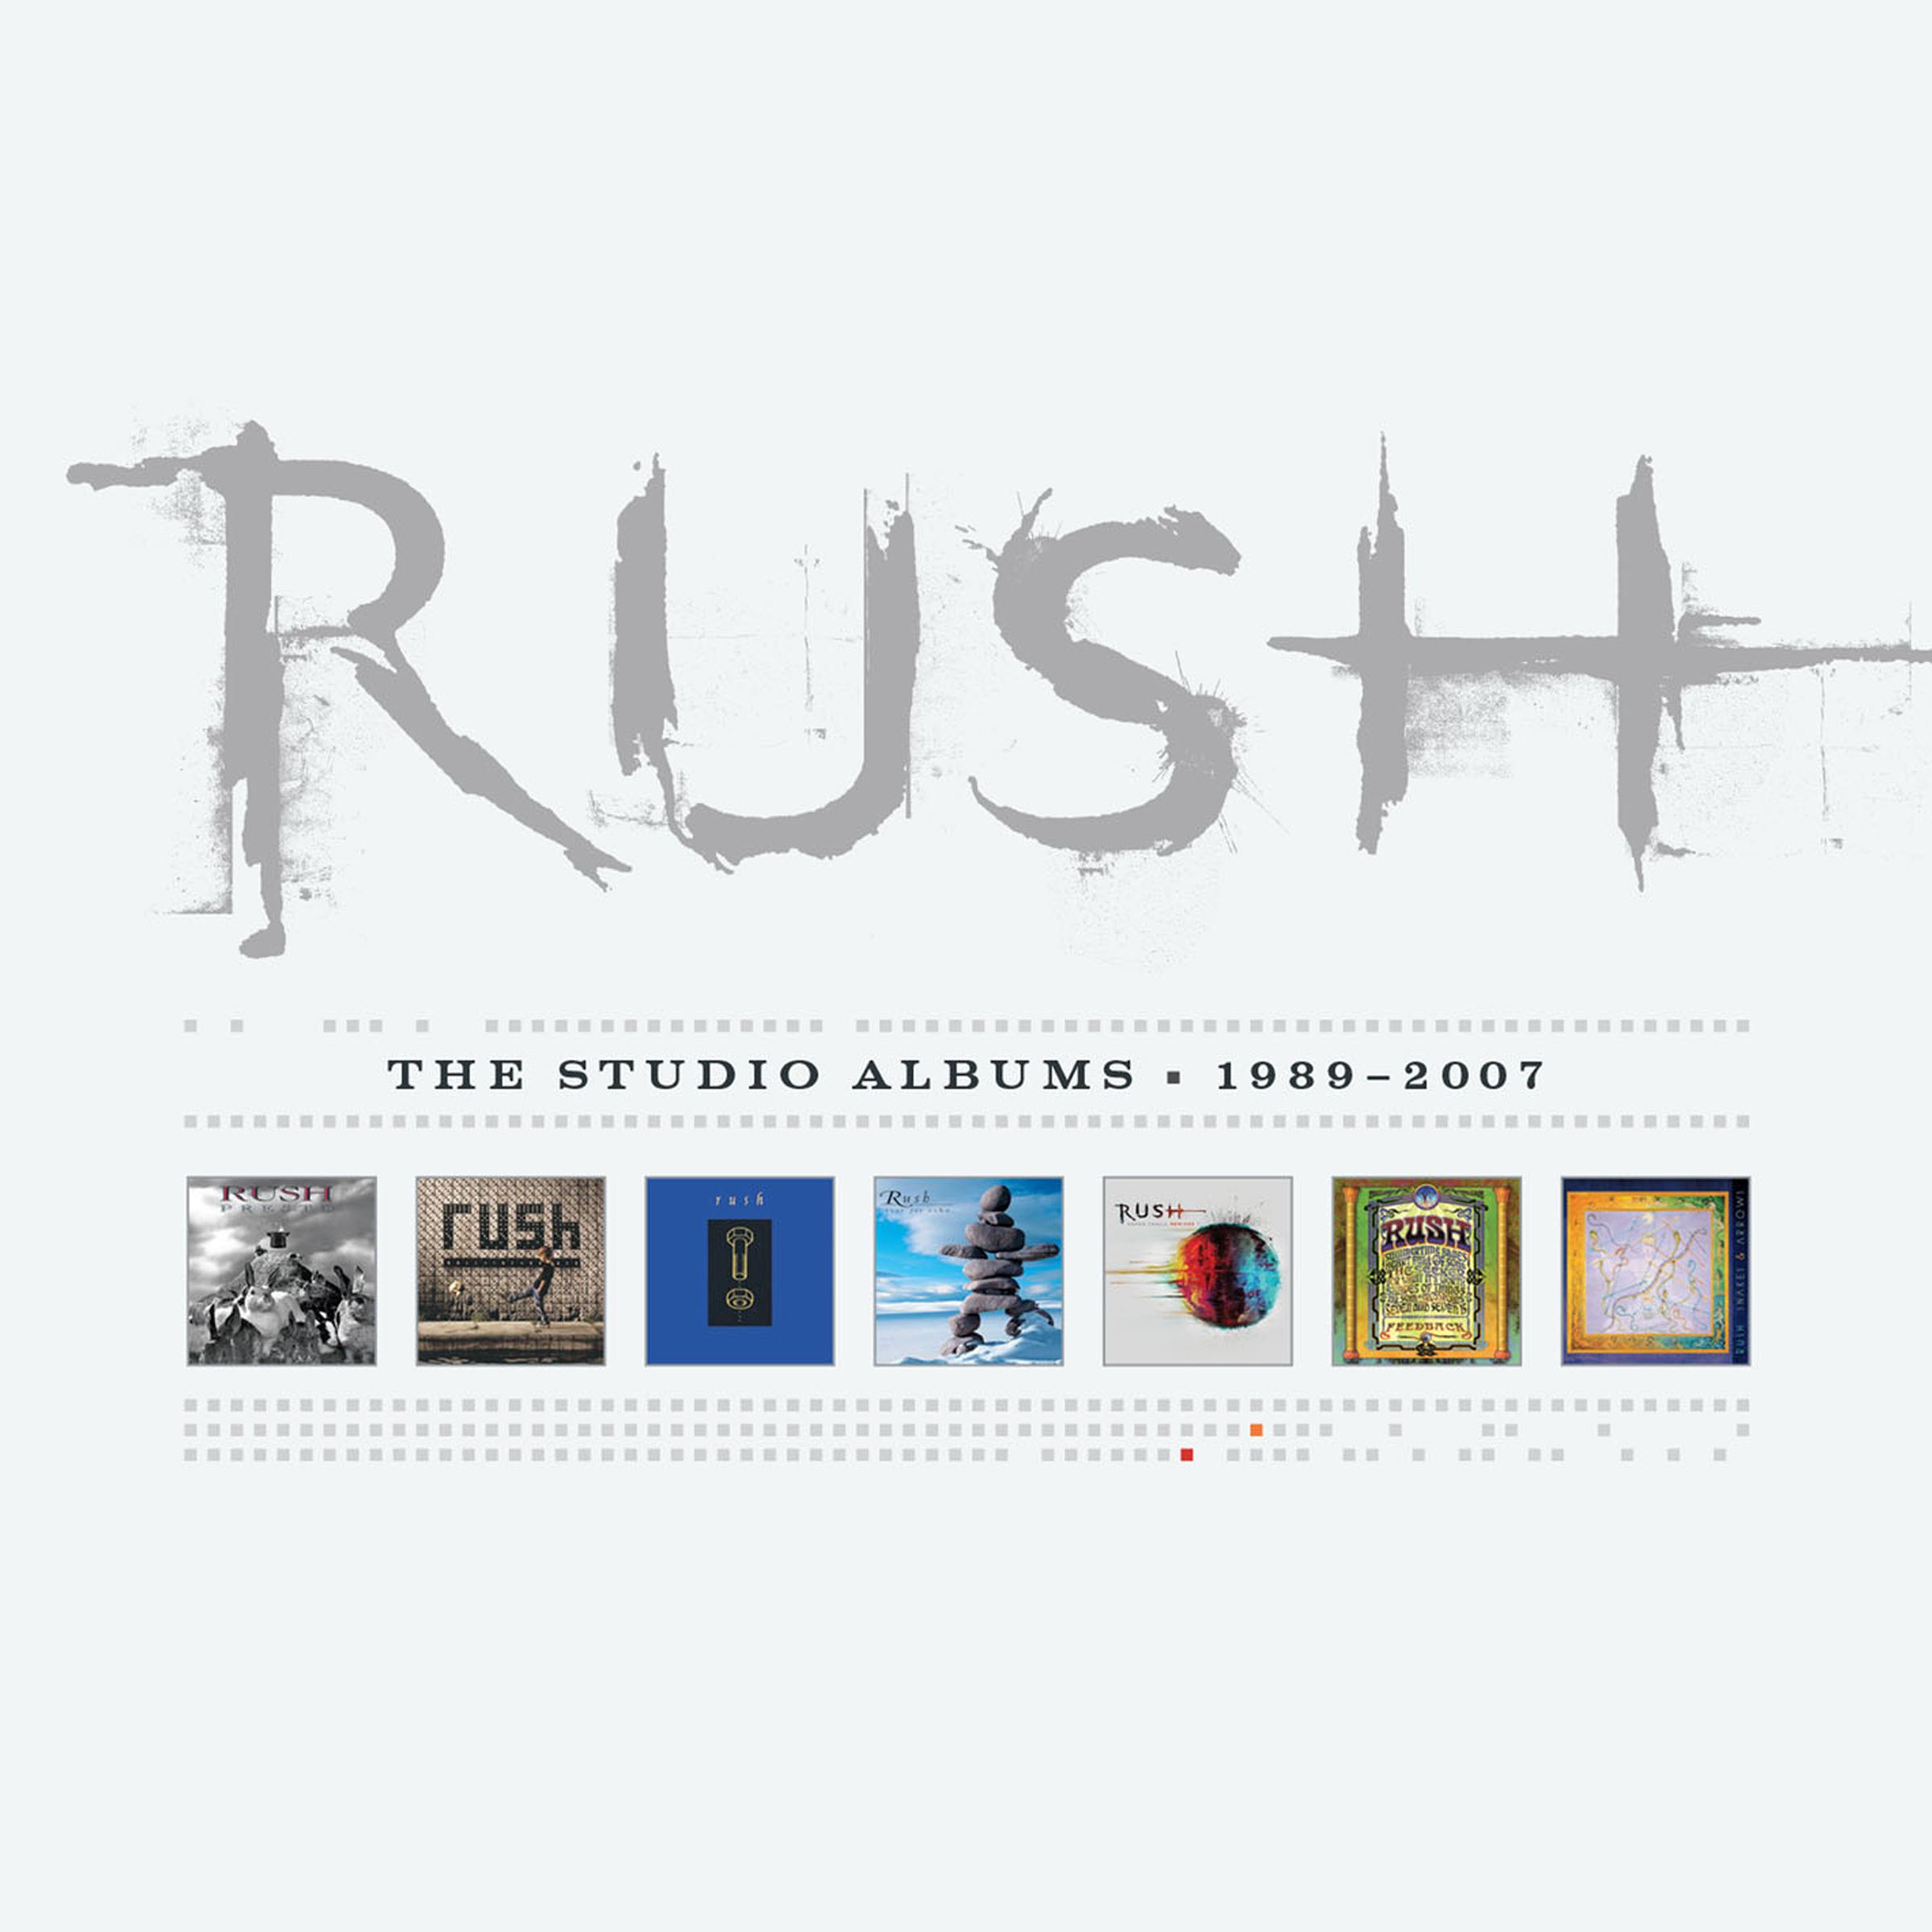 Rush - One Little Victory (2013 Remix)